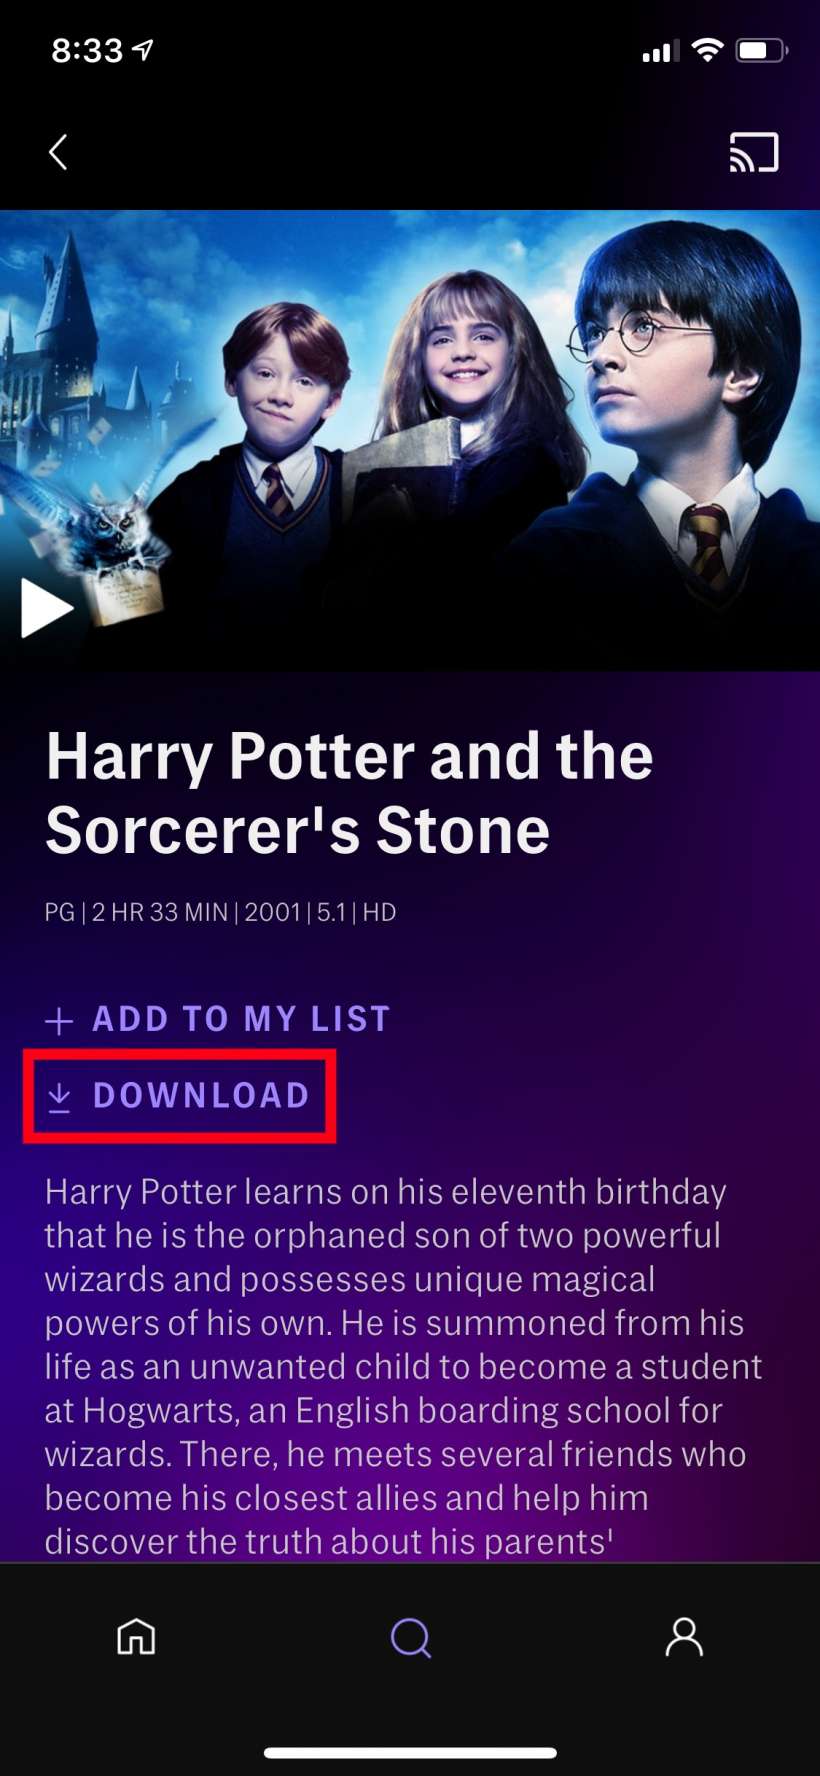 How to download HBO Max movies and shows to watch offline on iPhone and iPad.